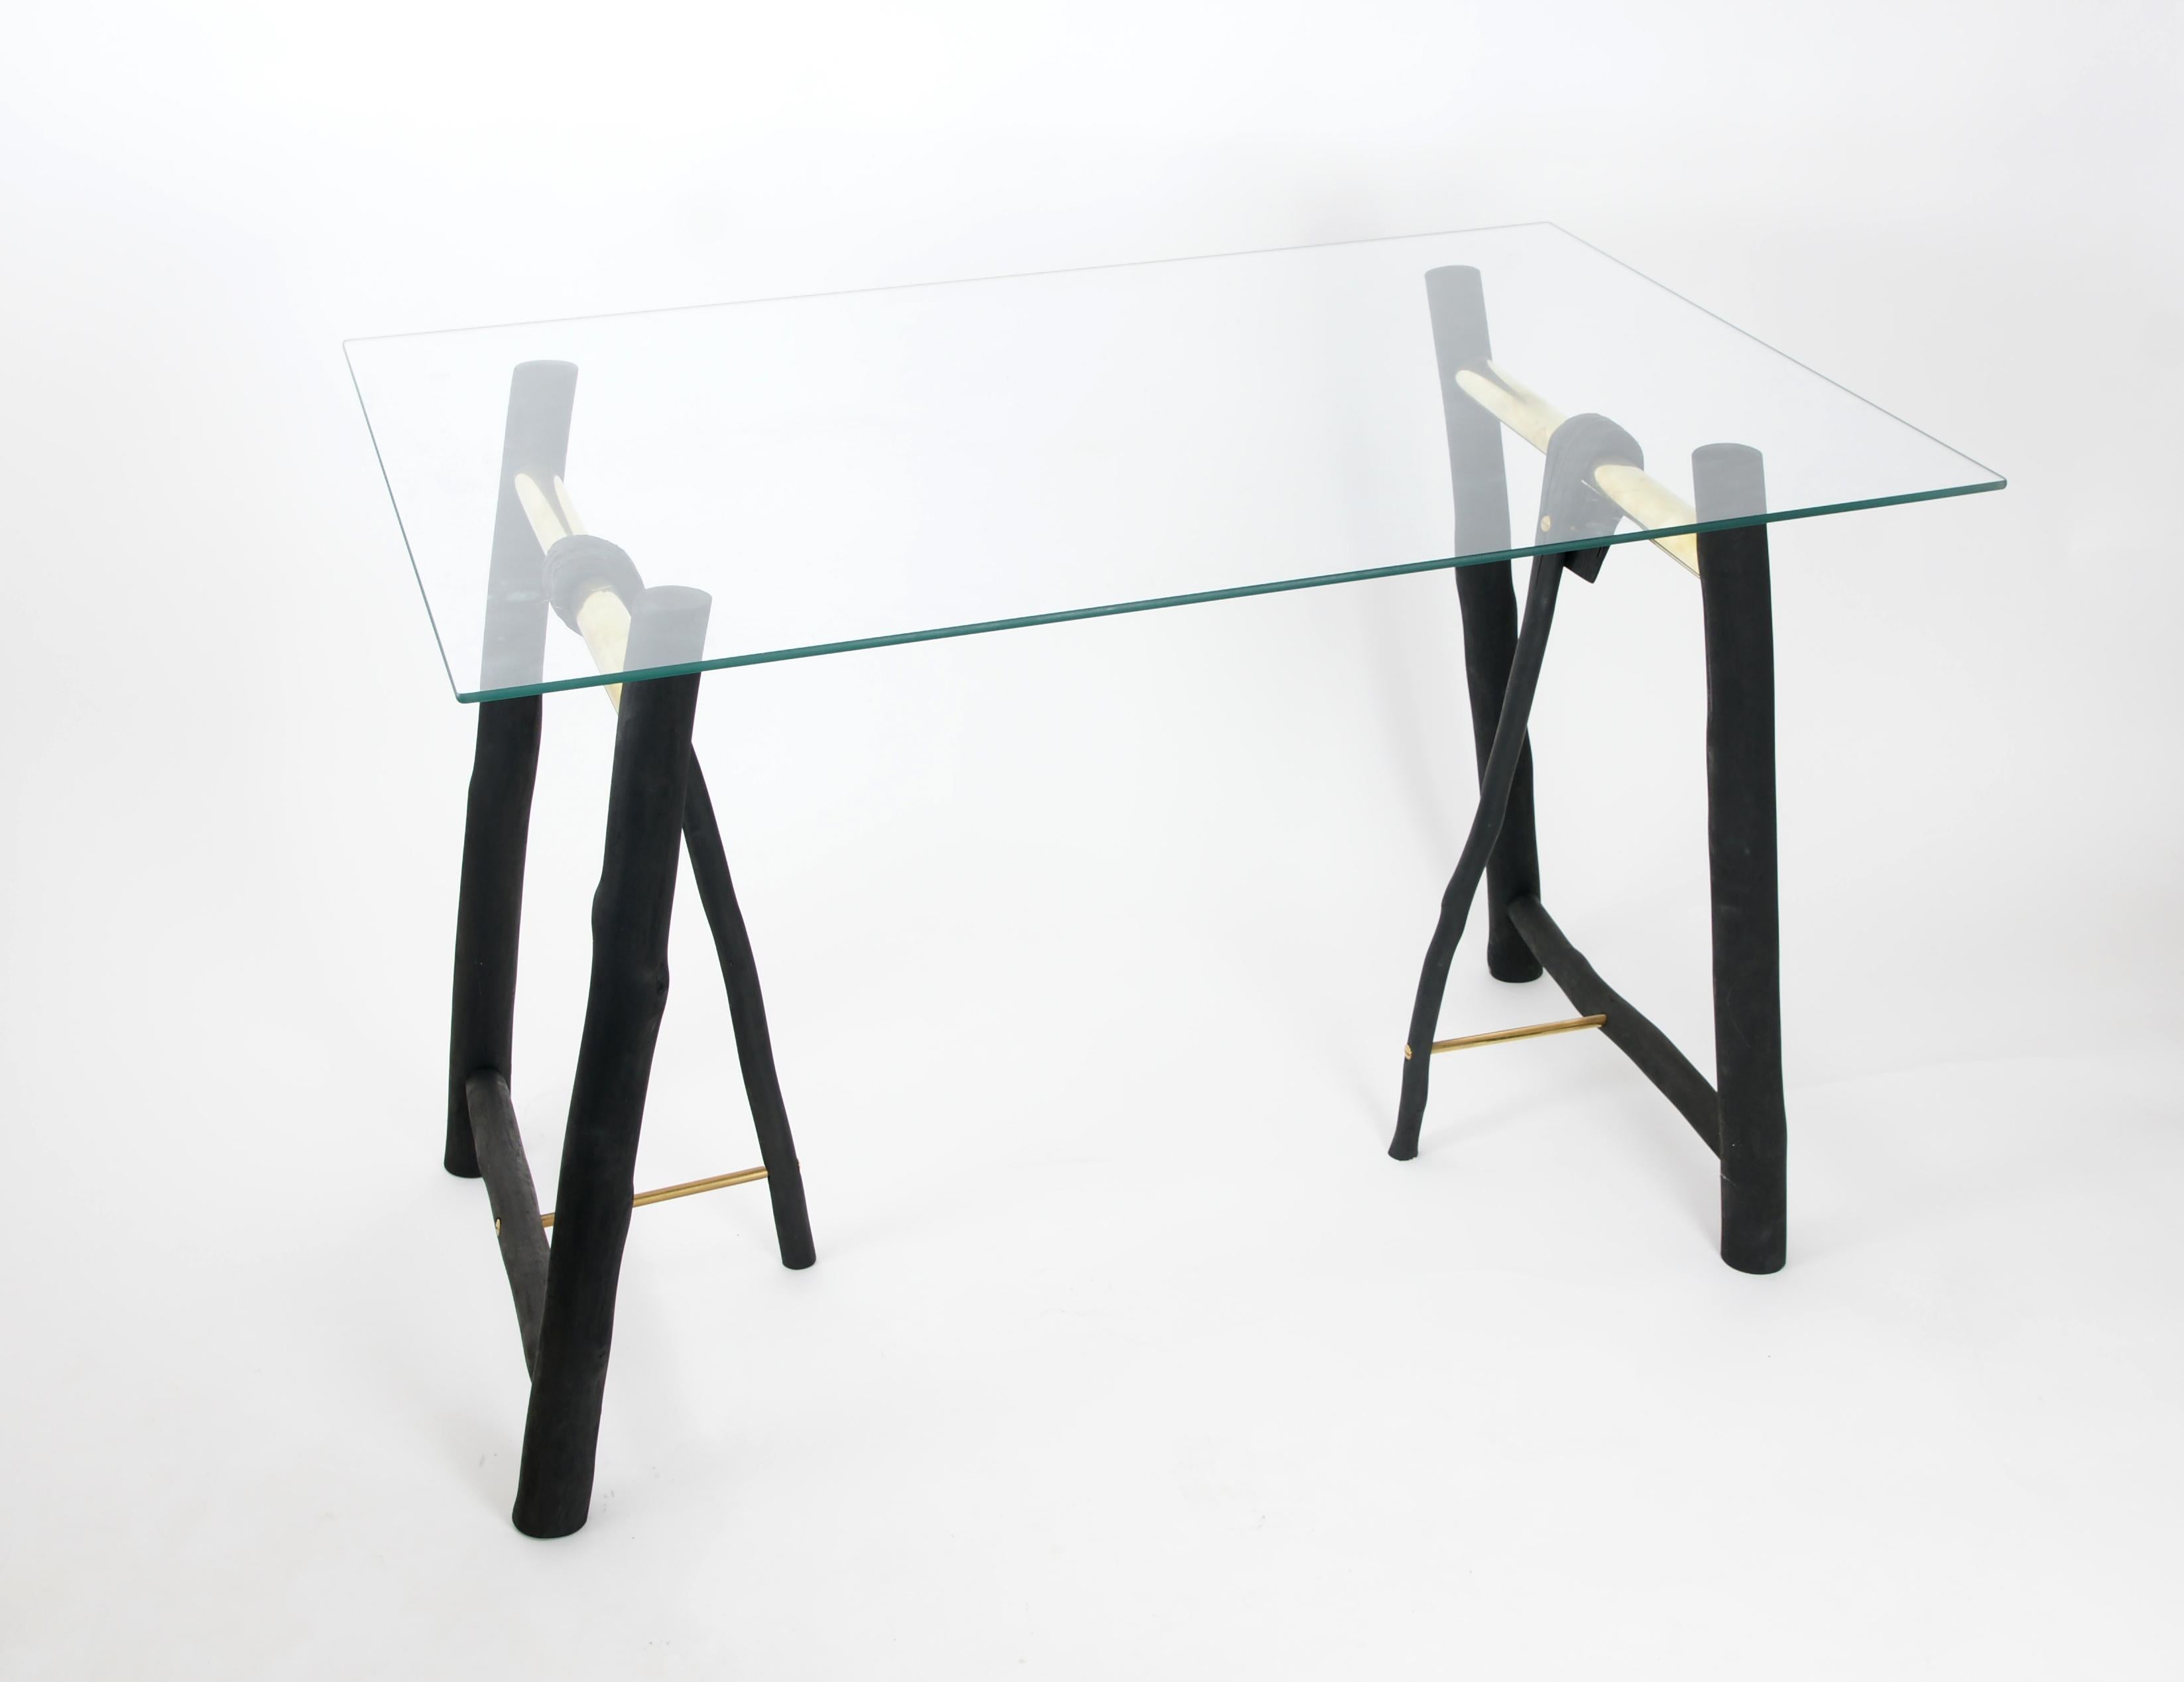 Set of 2 pressed wood trestle by Johannes Hemann.
The glass top is not included.
Materials: Wood, brass, glass
Dimensions: H 78 cm x D 35 cm x W 60 cm.

The series 